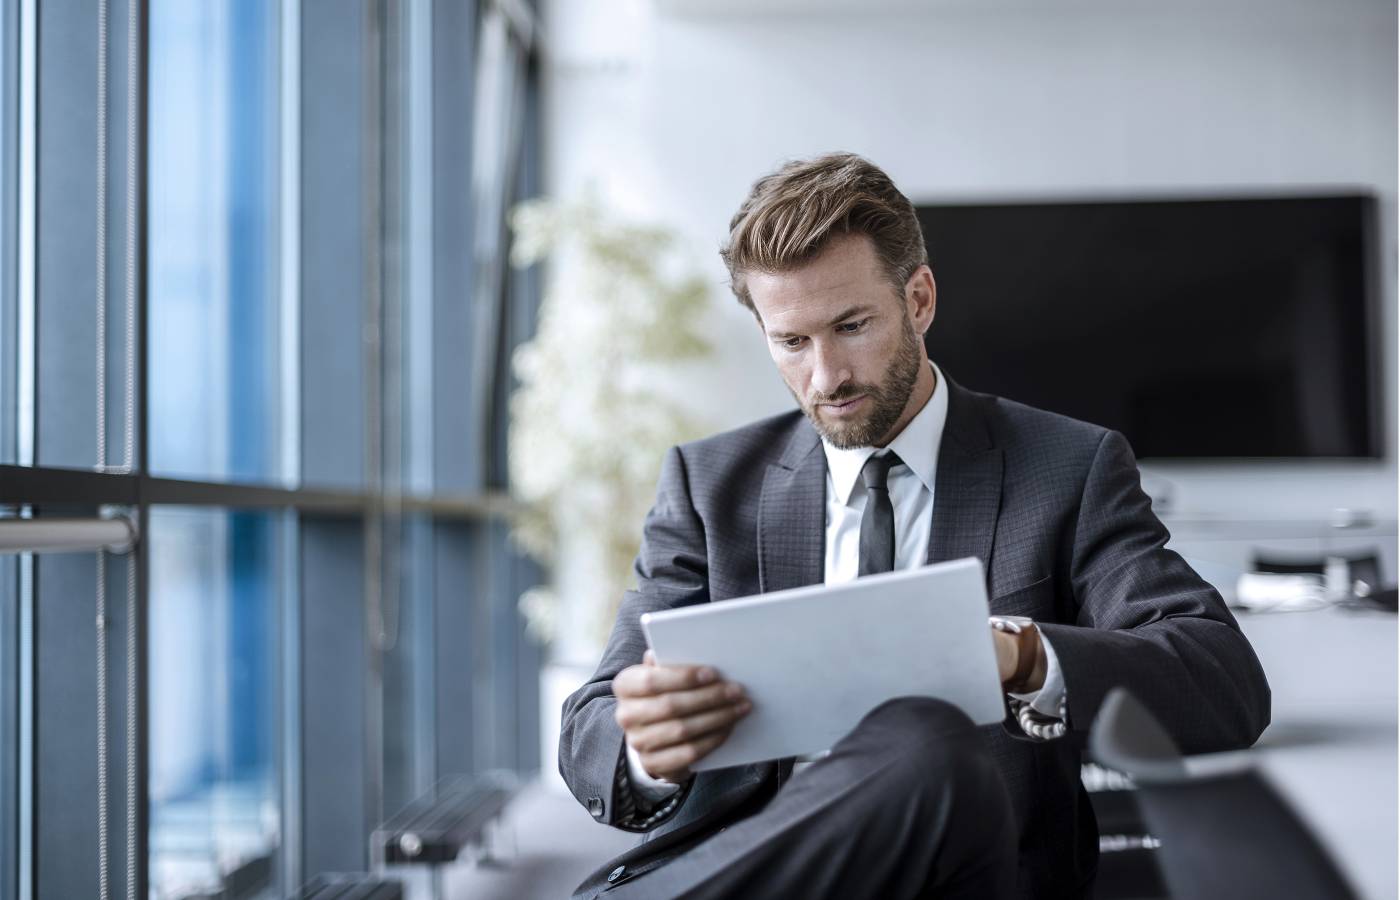 Businessman using a tablet in an office